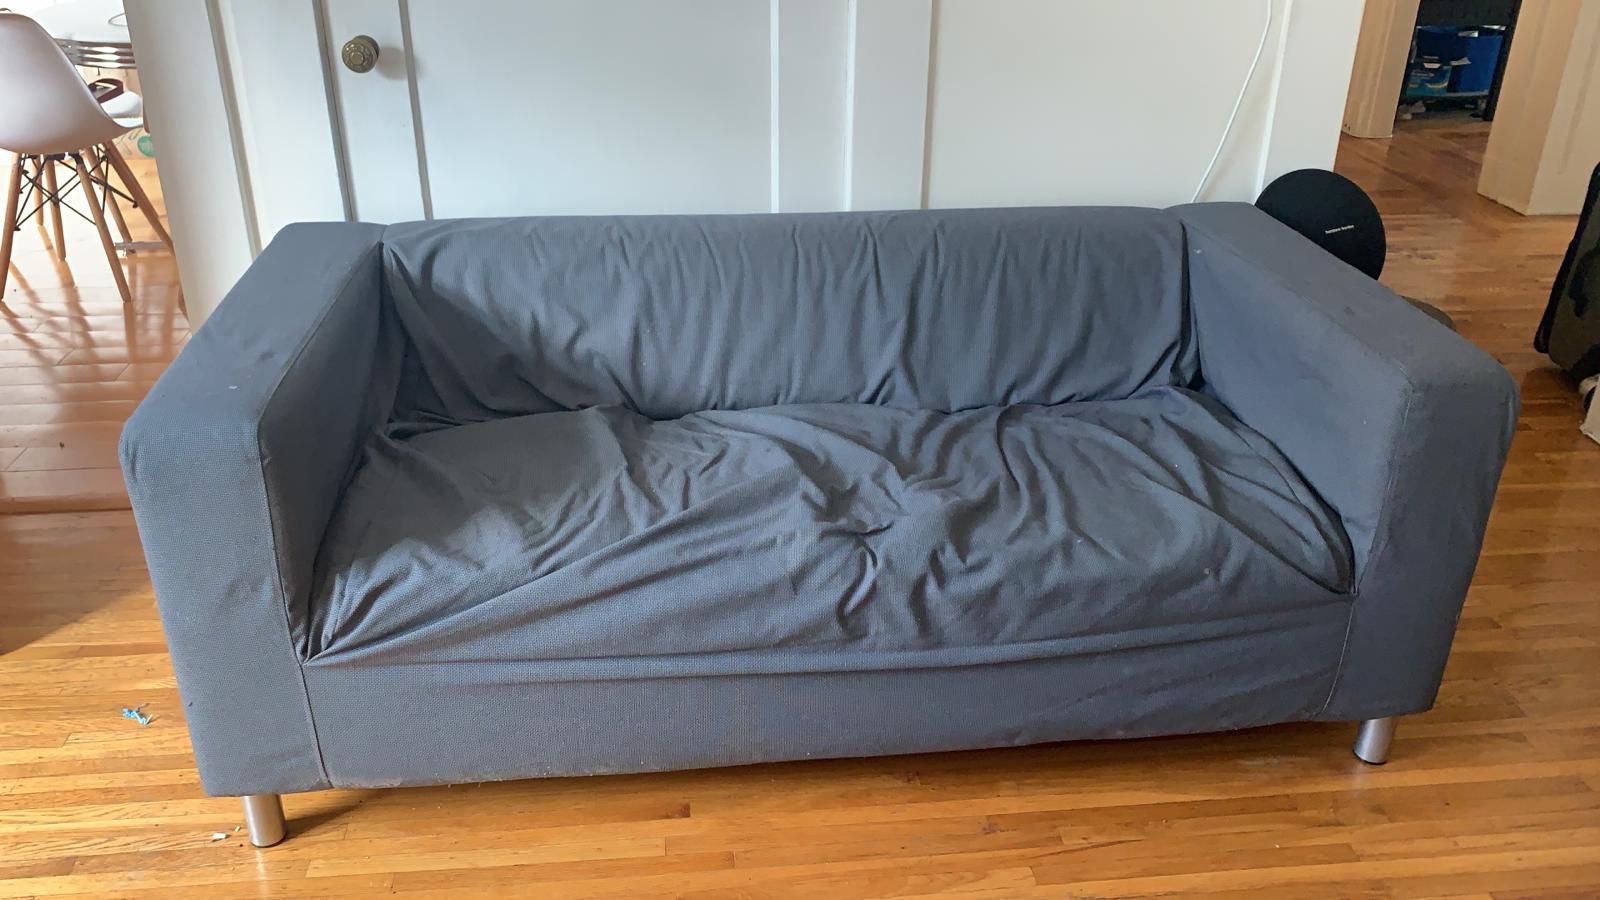 Blue/Grey couch for FREE